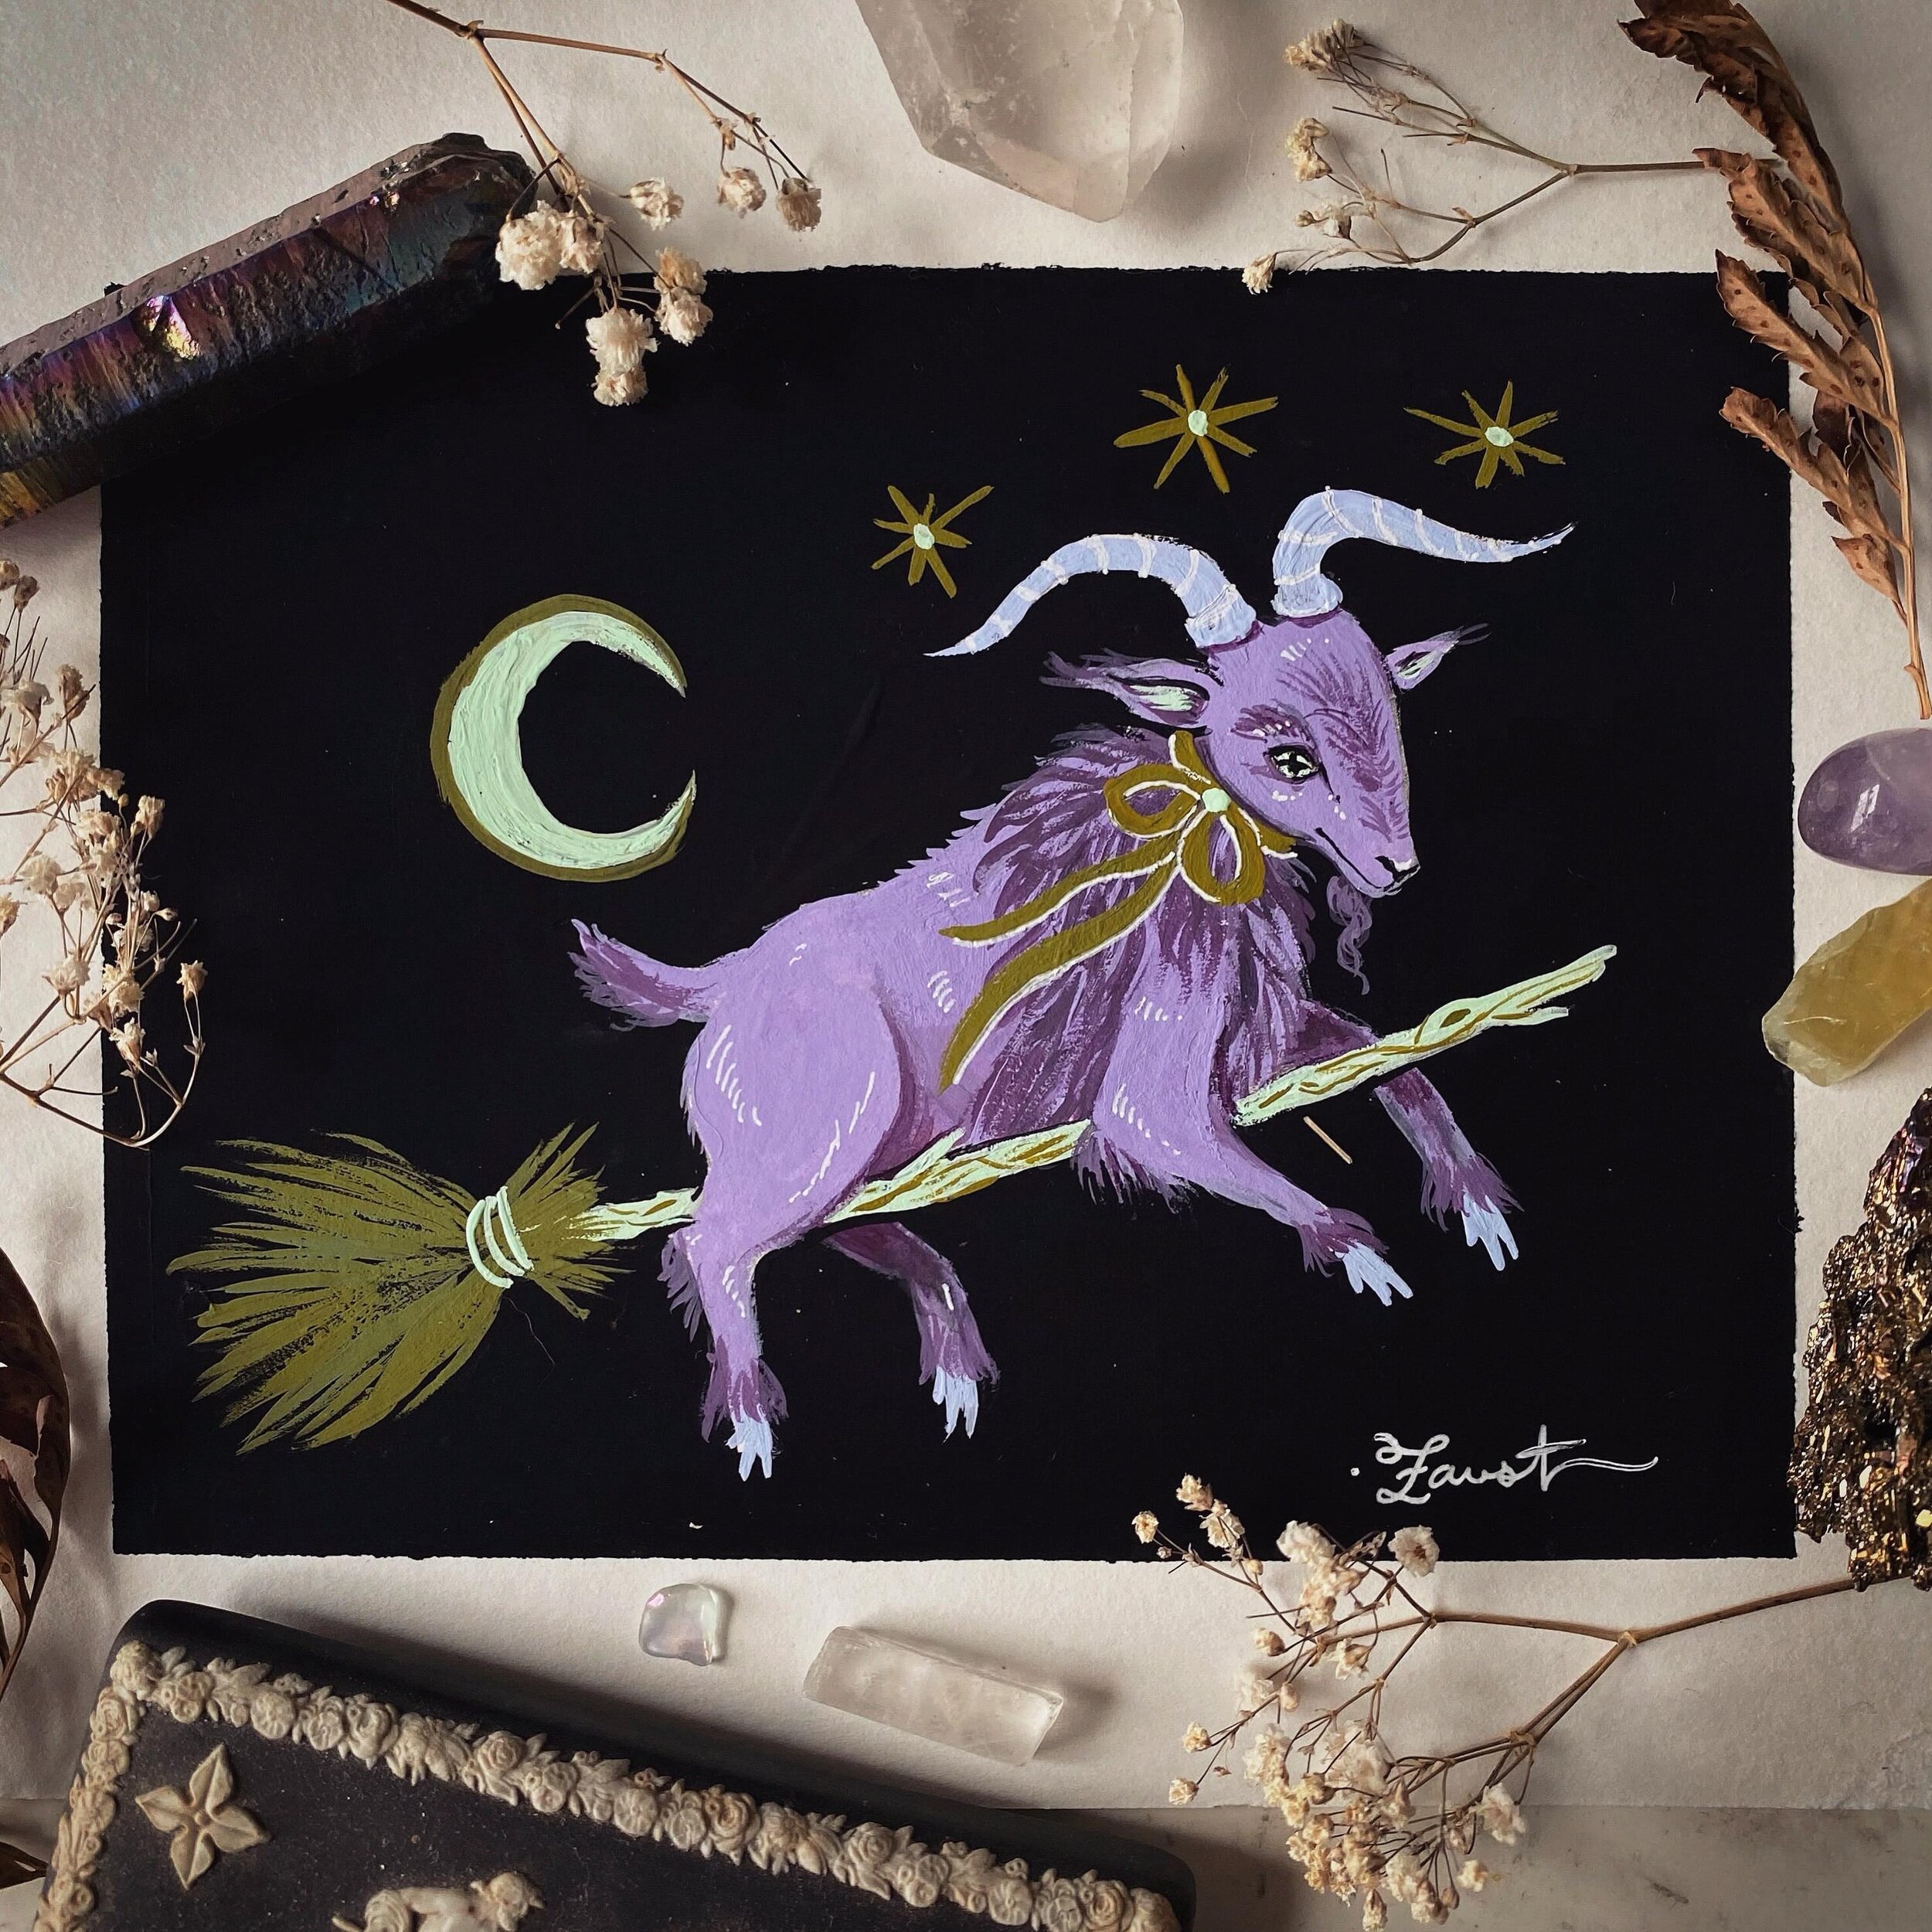 Me flying into this weekend like: 🧹💜🐐✨✨✨

*Sweet &ldquo;Little Devil&rdquo; bb painted in 2020🖤